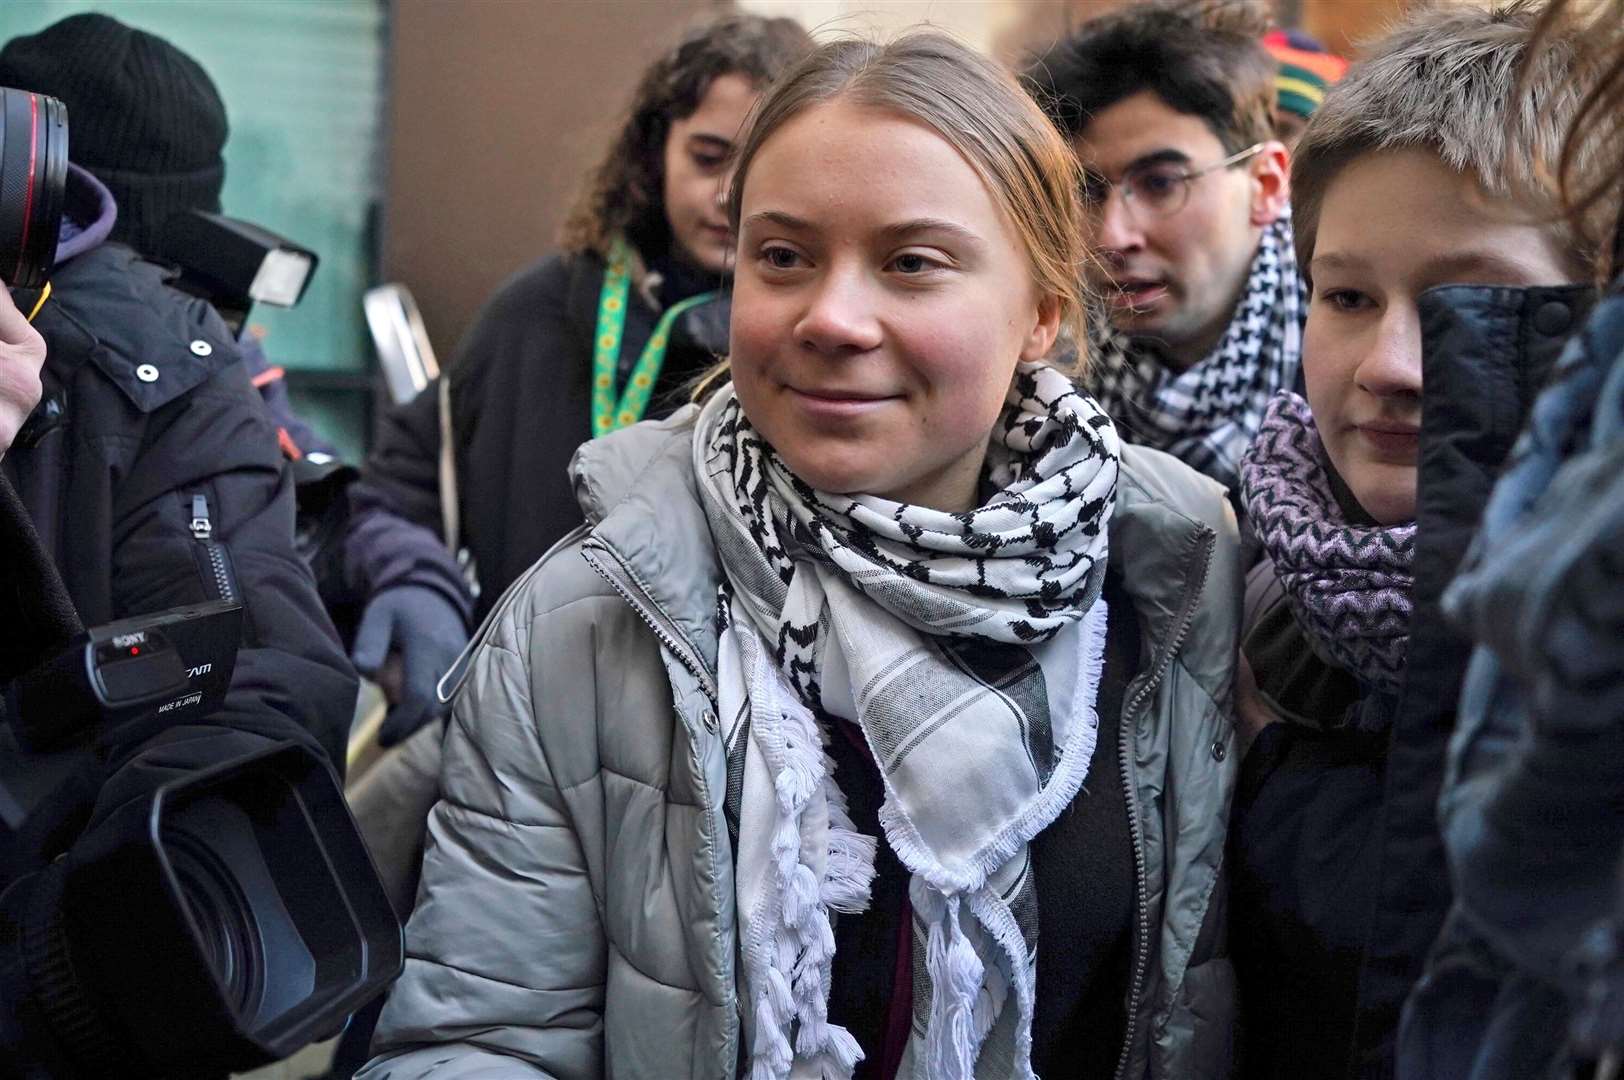 Greta Thunberg is charged, along with four other activists, with a public order offence during a protest in central London last year (Jordan Pettitt/PA)